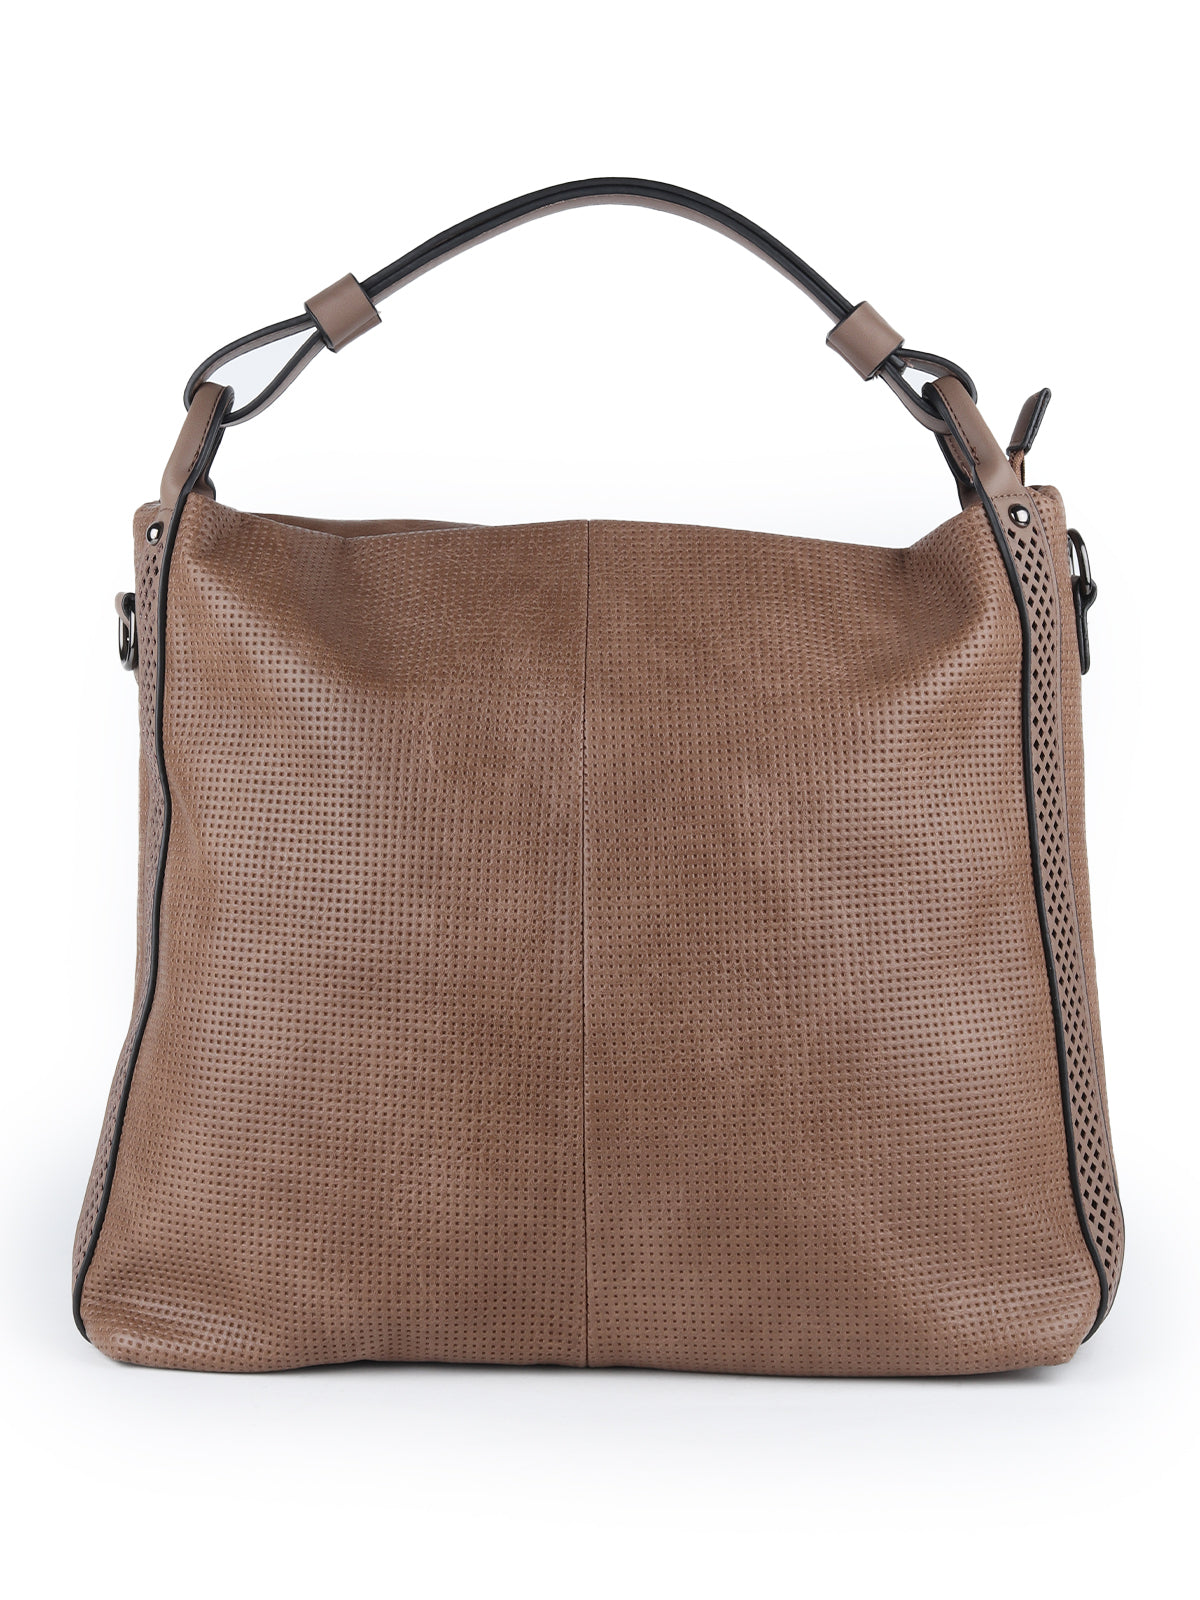 Odette Brown Textured Tote Bag for Women